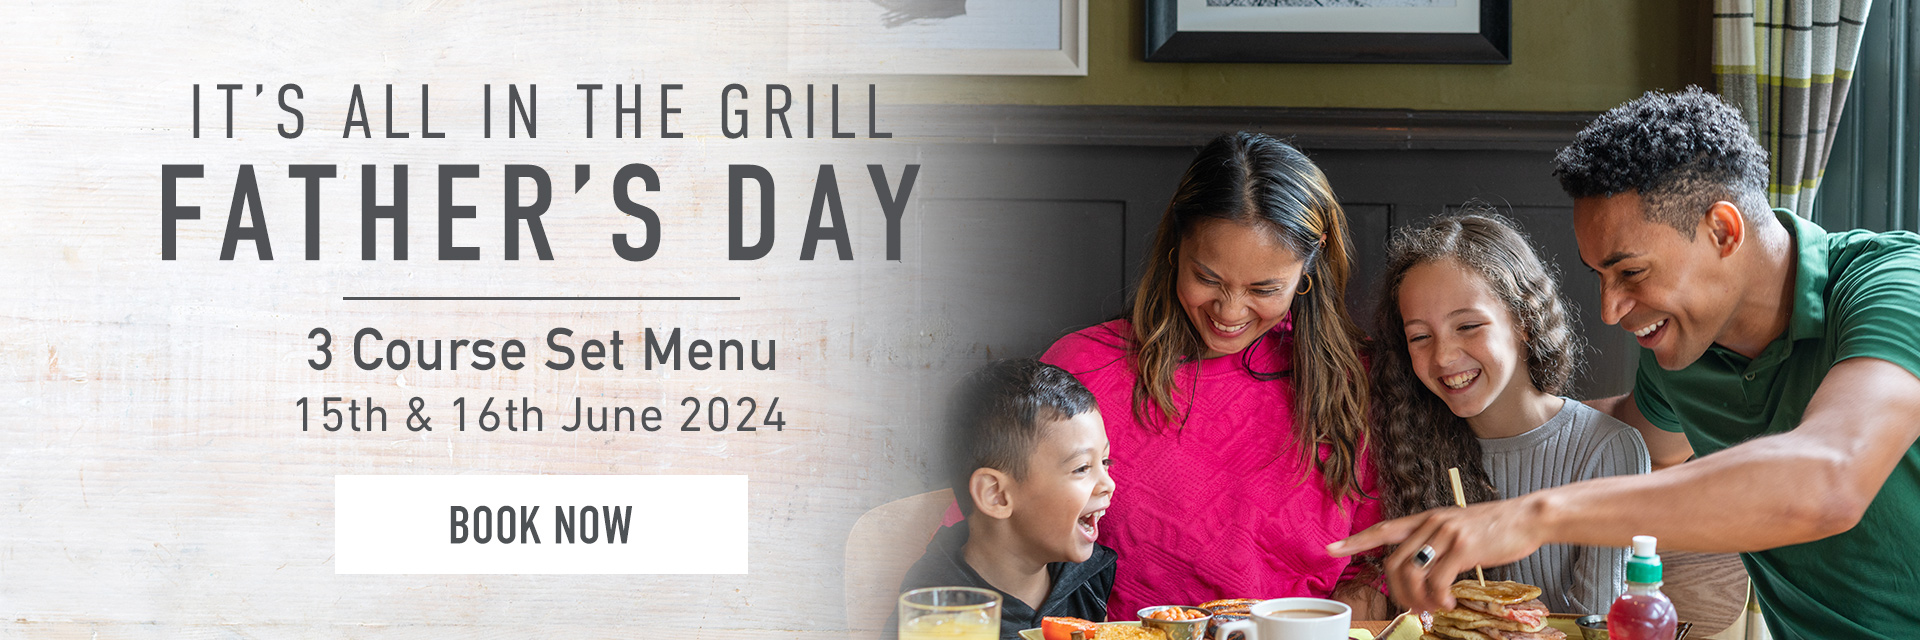 Father’s Day at Harvester Sarn